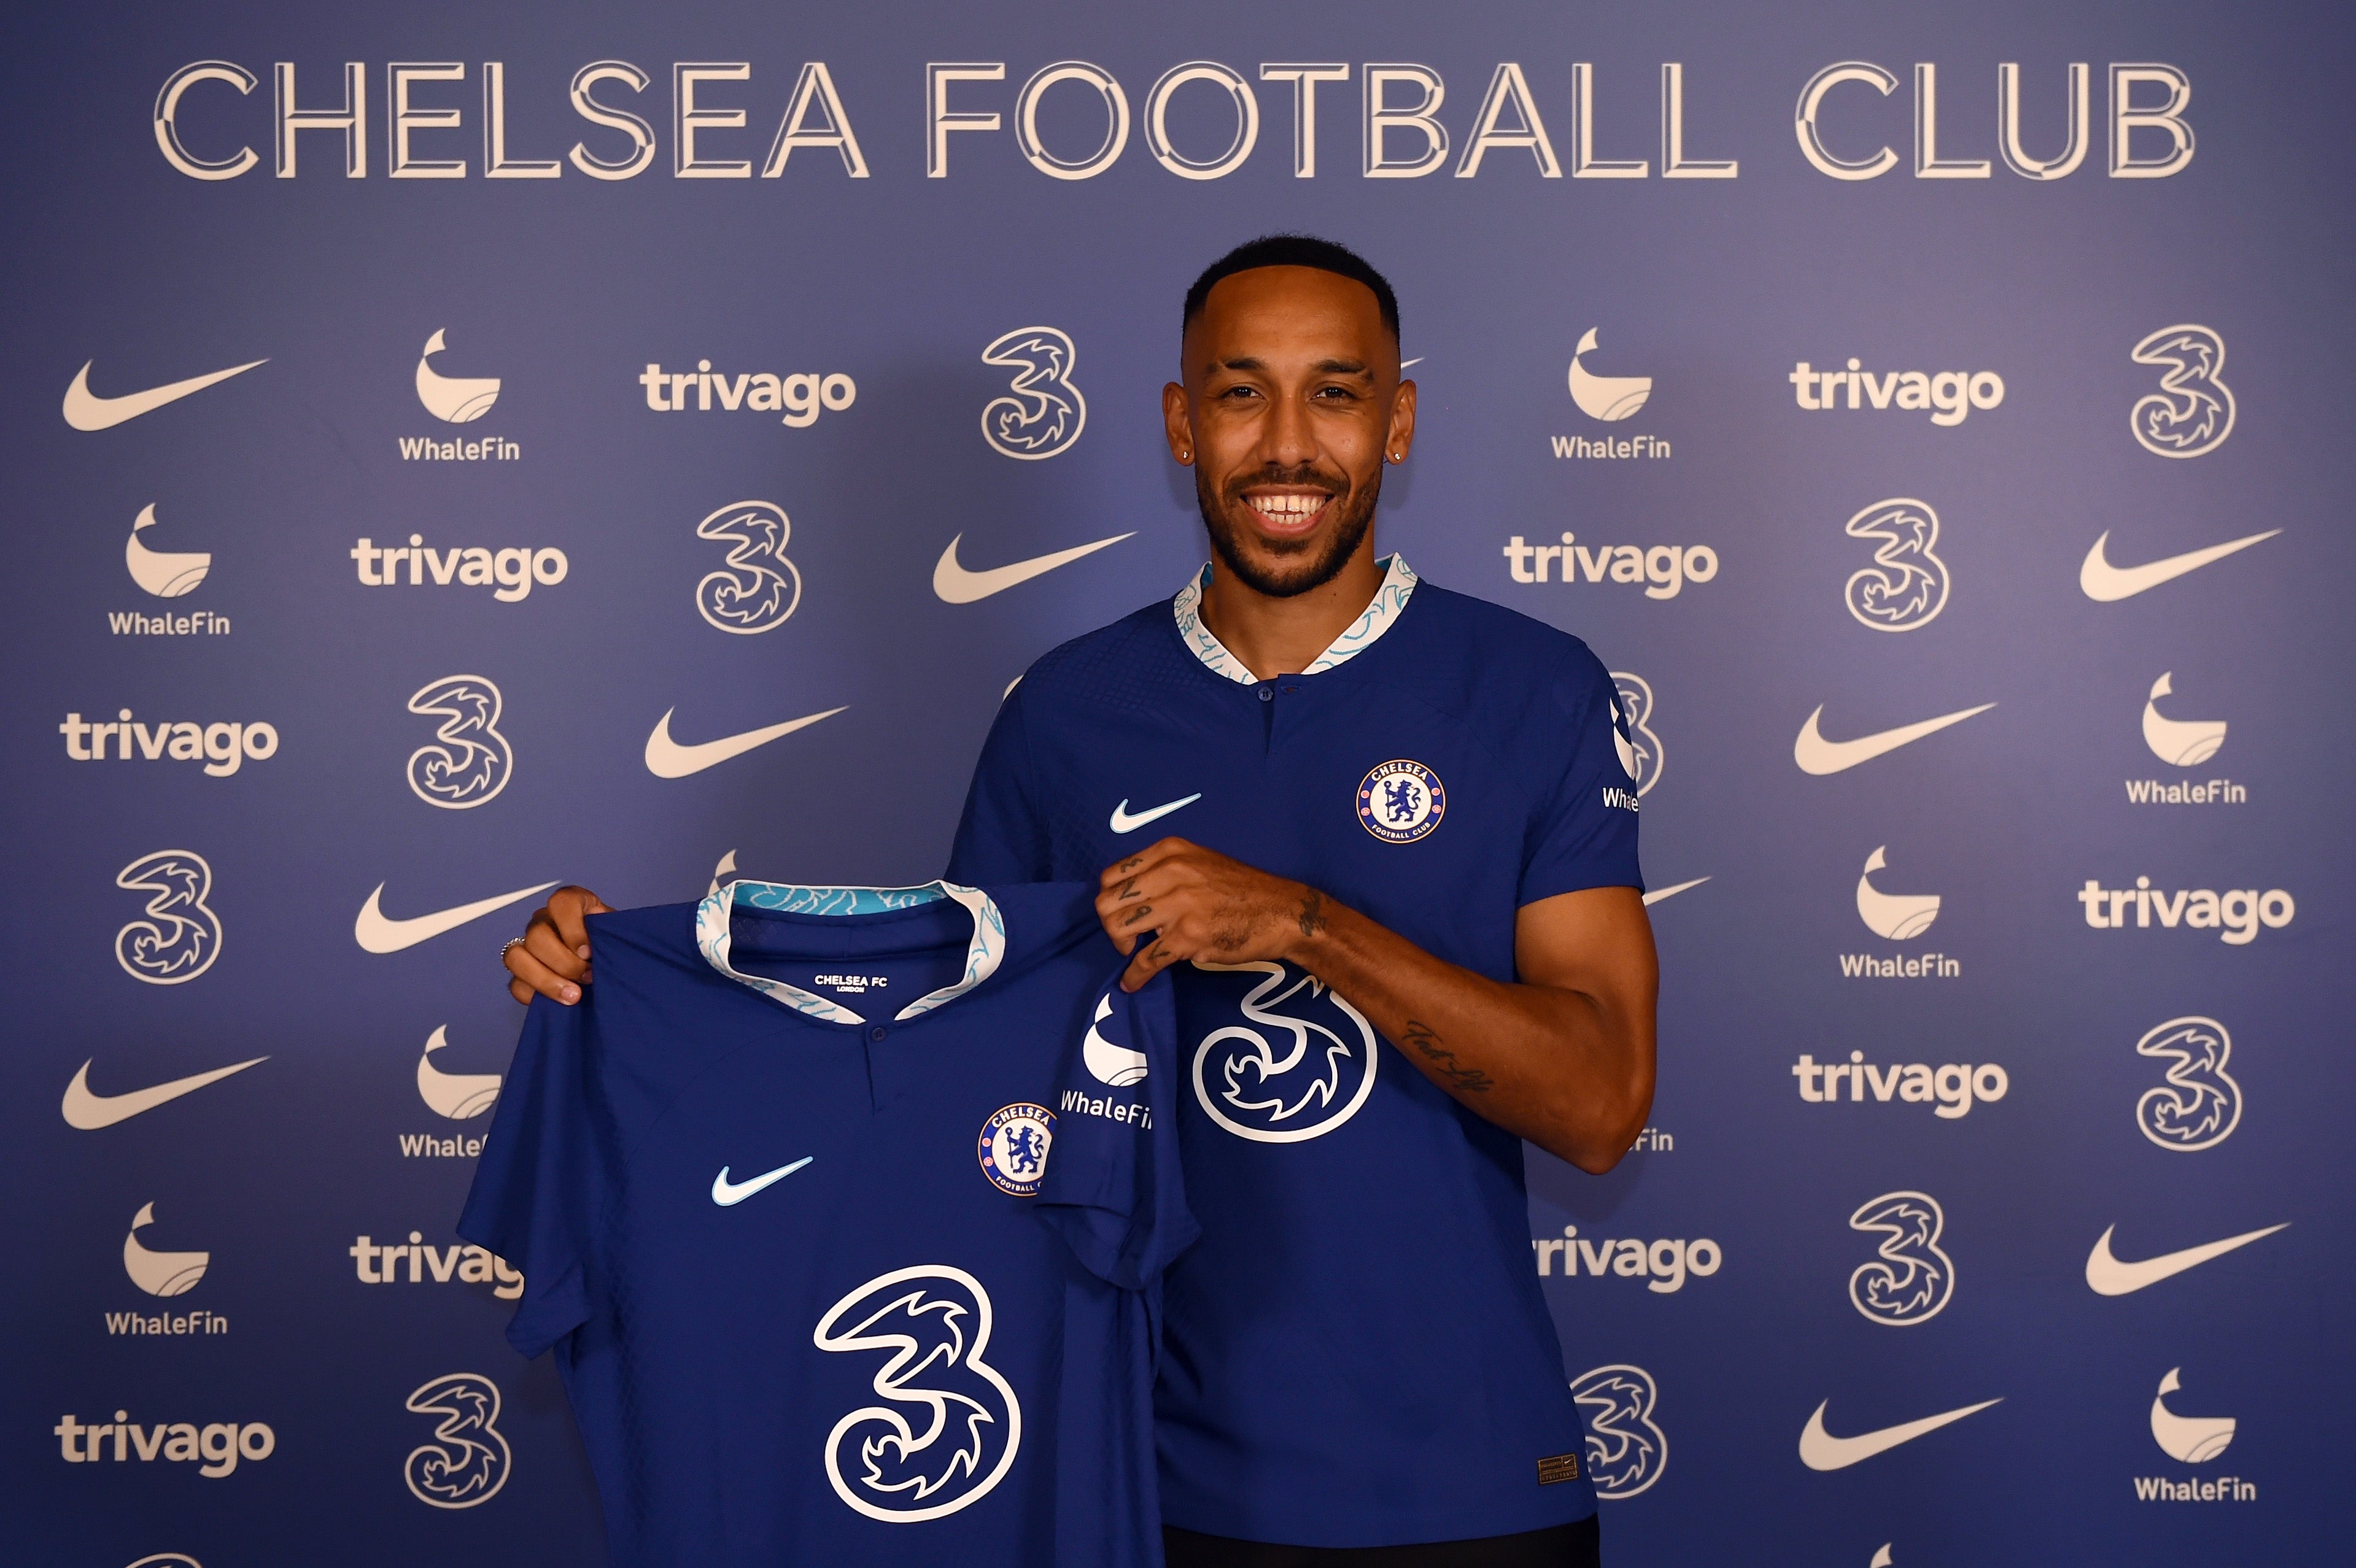 Pierre-Emerick Aubameyang poses with the Chelsea shirt